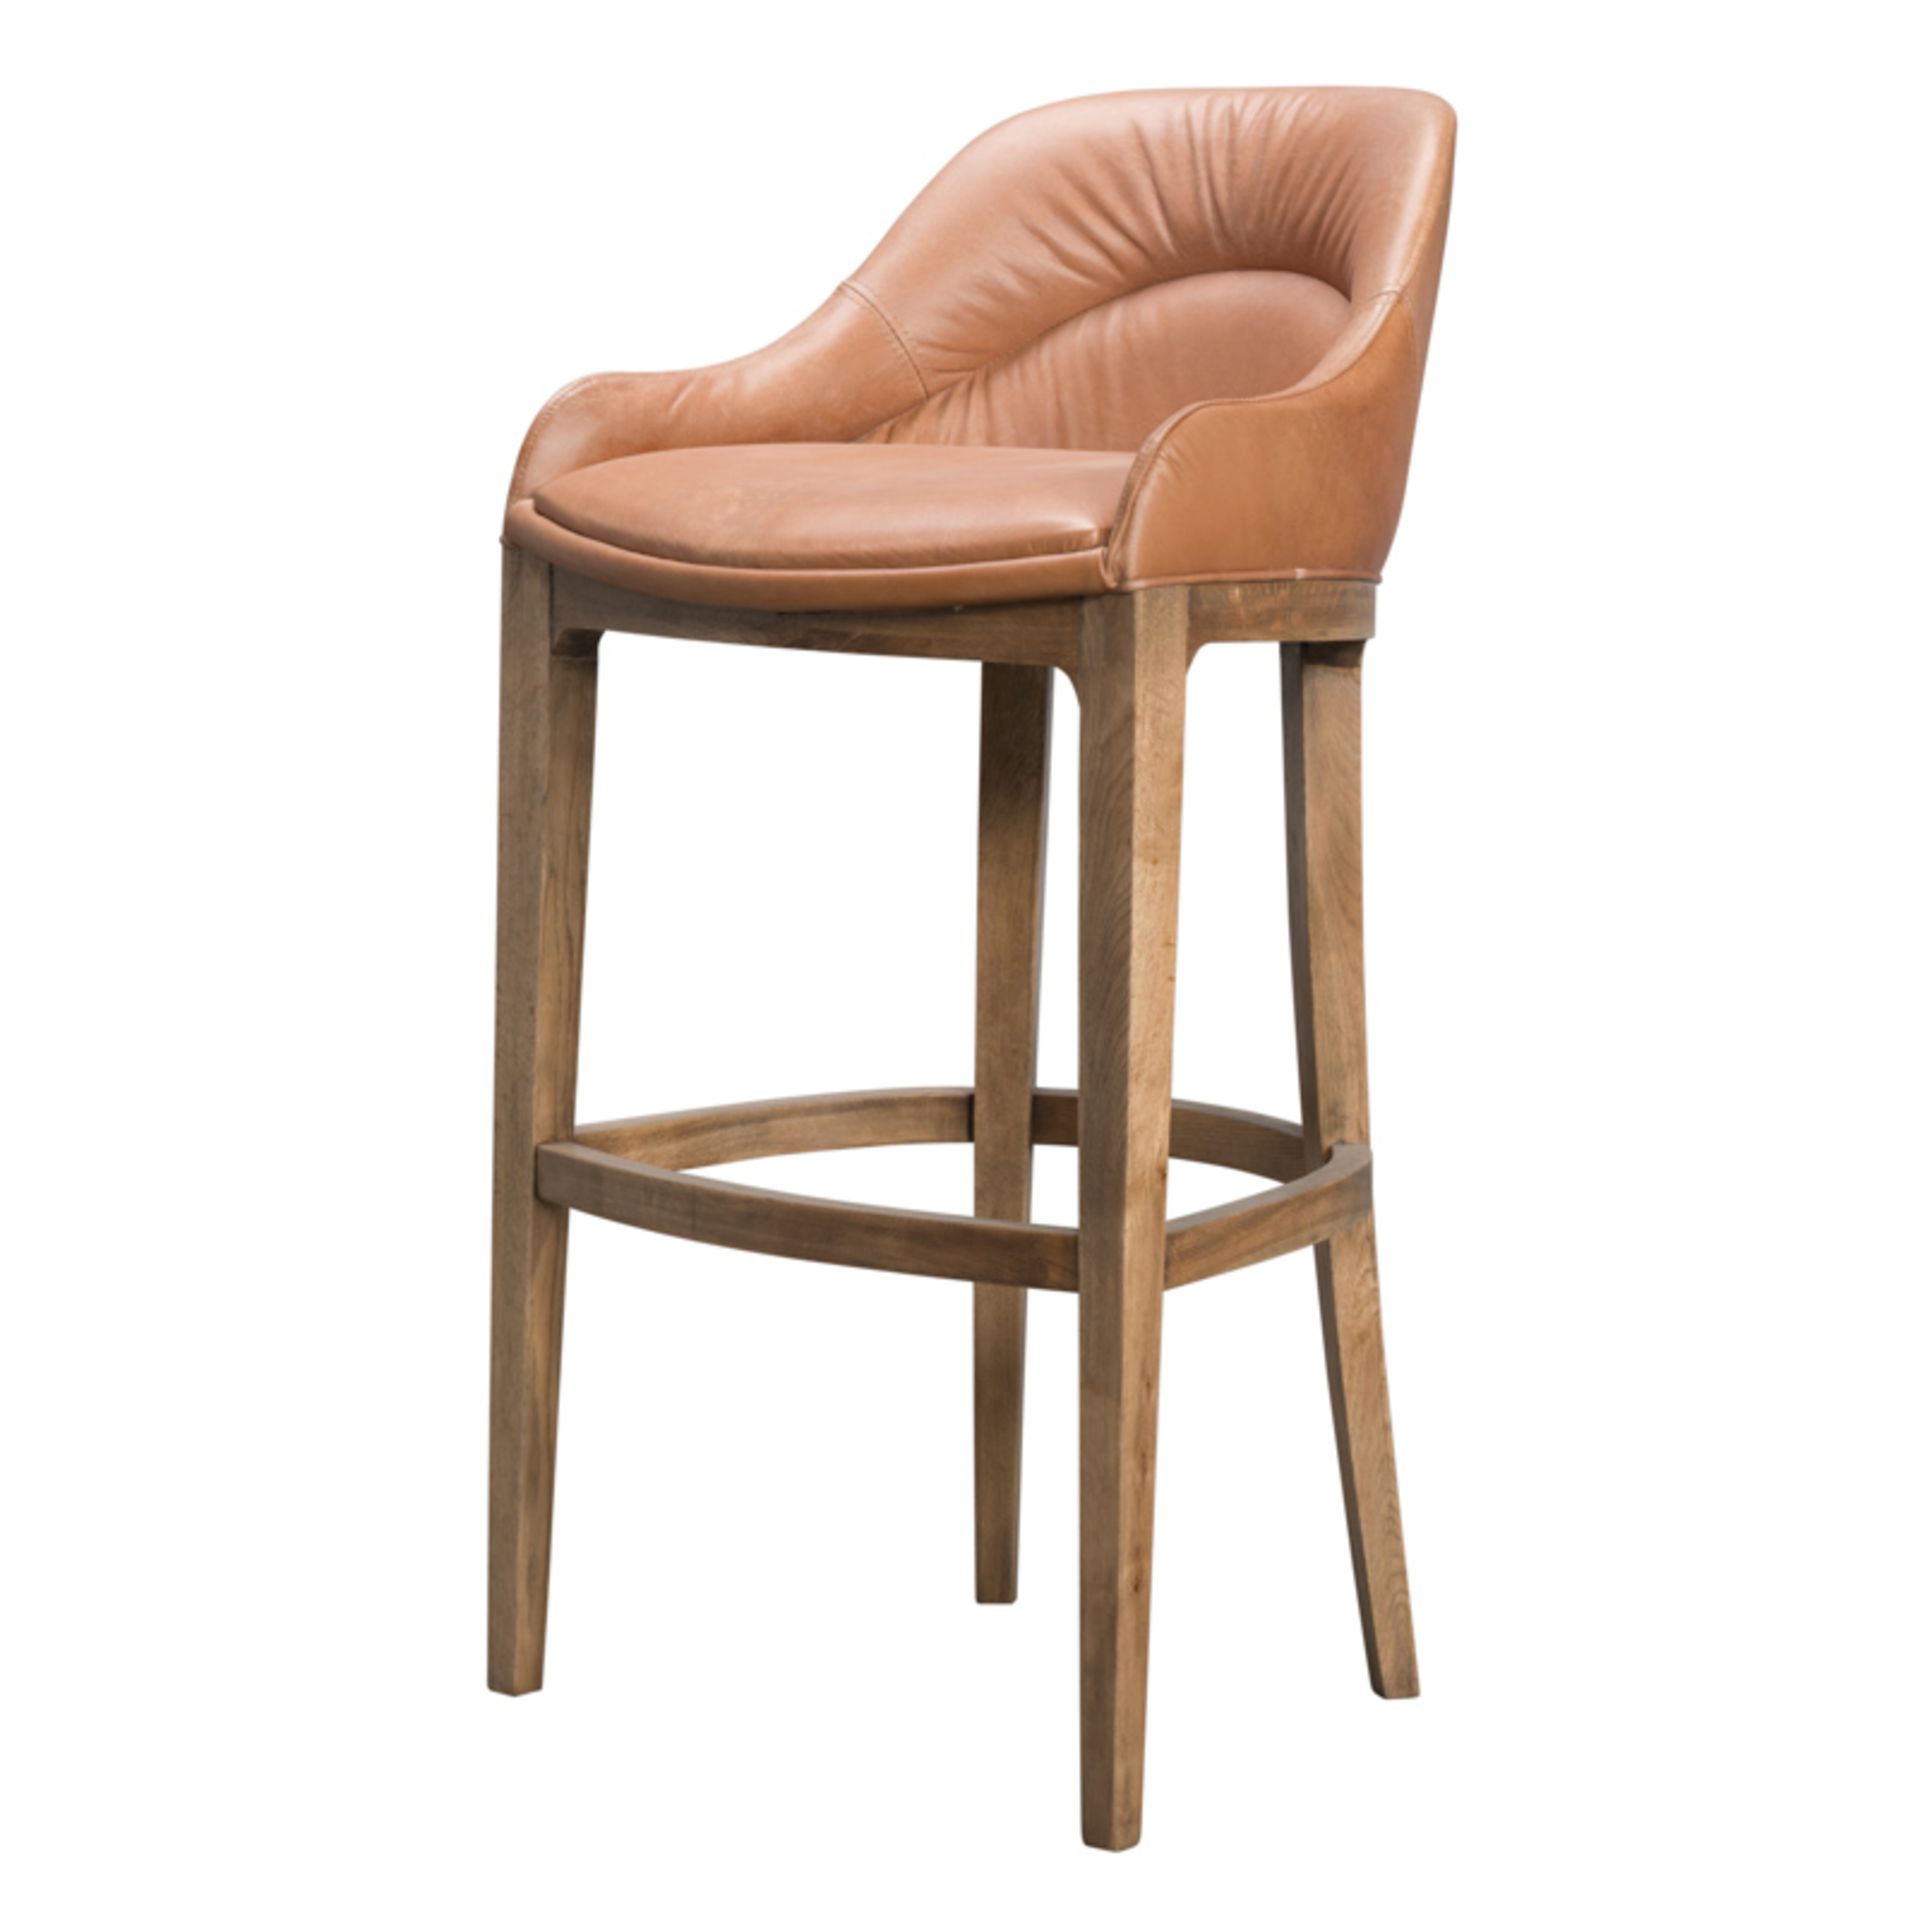 Caza Barstool Compact Barstool Retro Sand Leather And Weathered Oak A Mix Of A Modern Seat Shape And